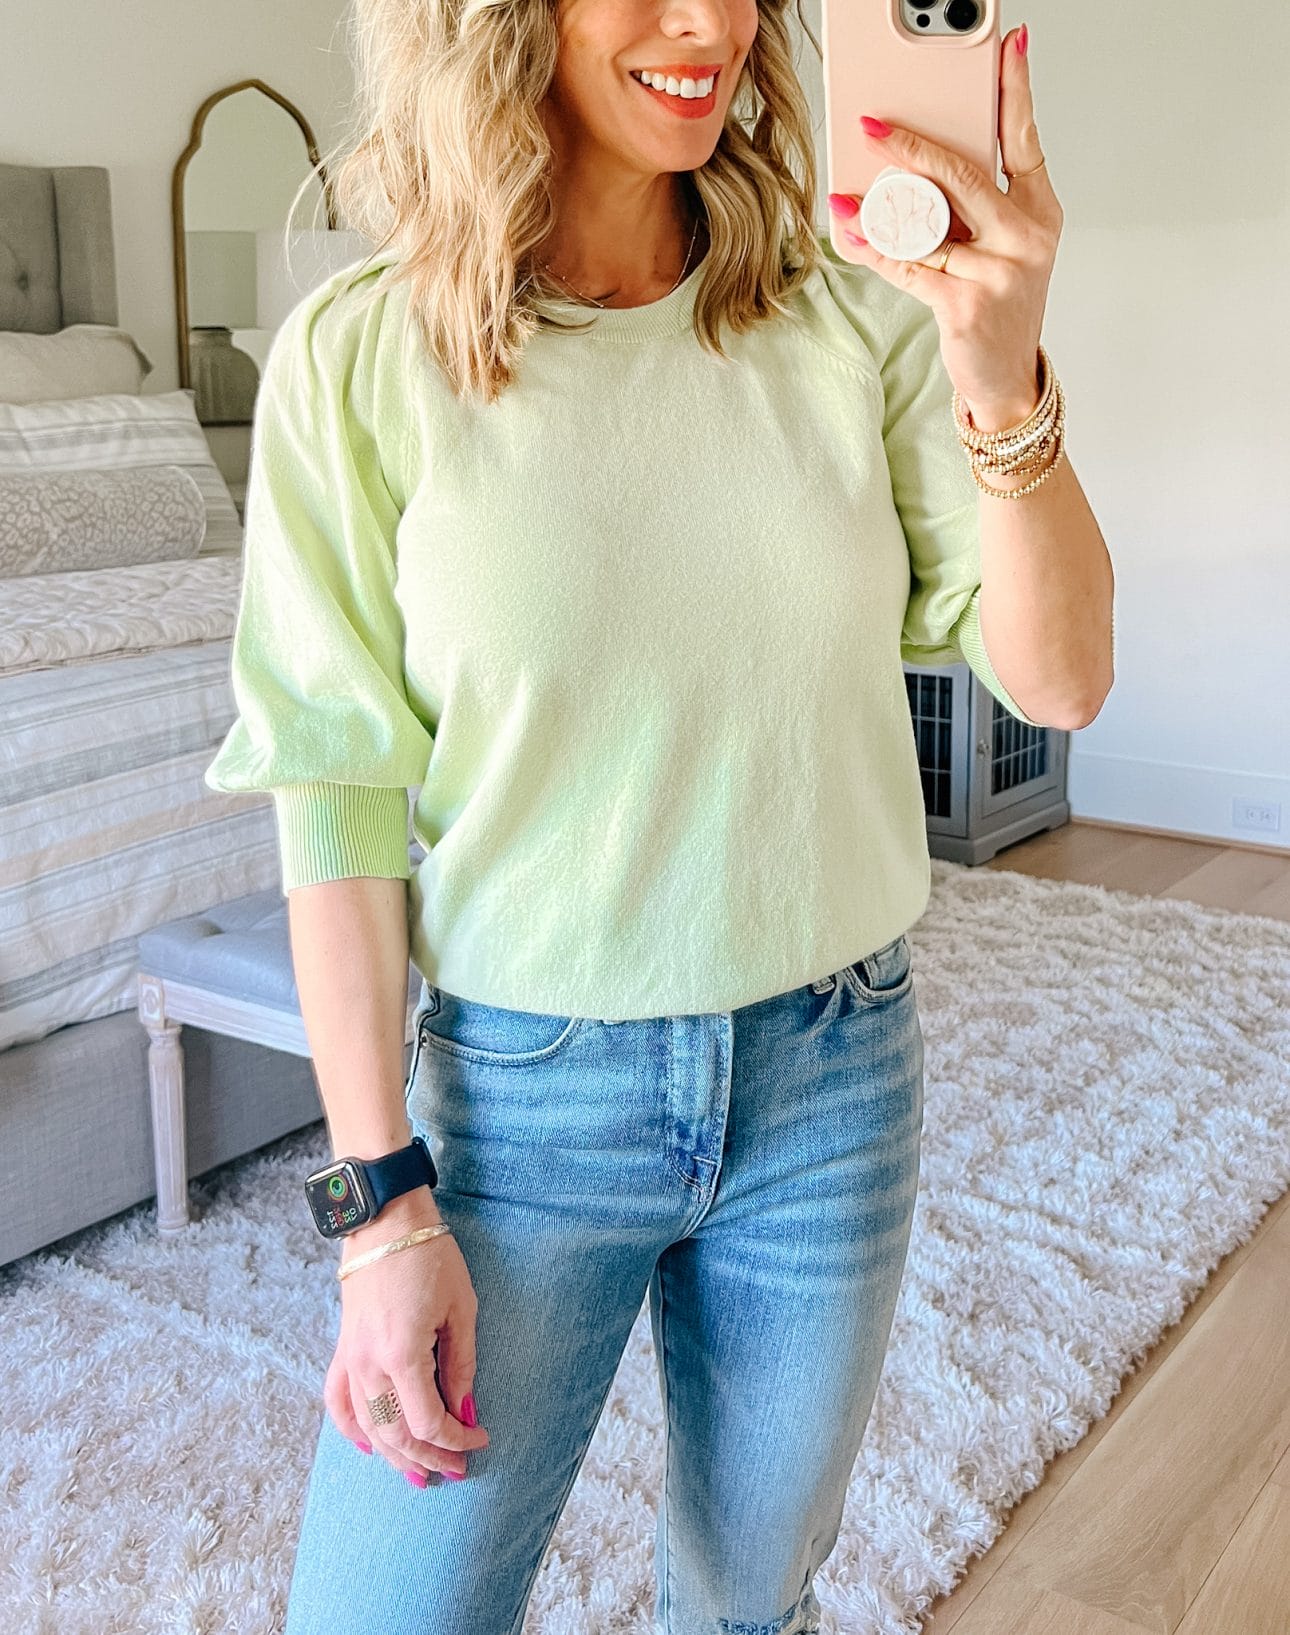 Puff Sleeve Top, Jeans, Sandals